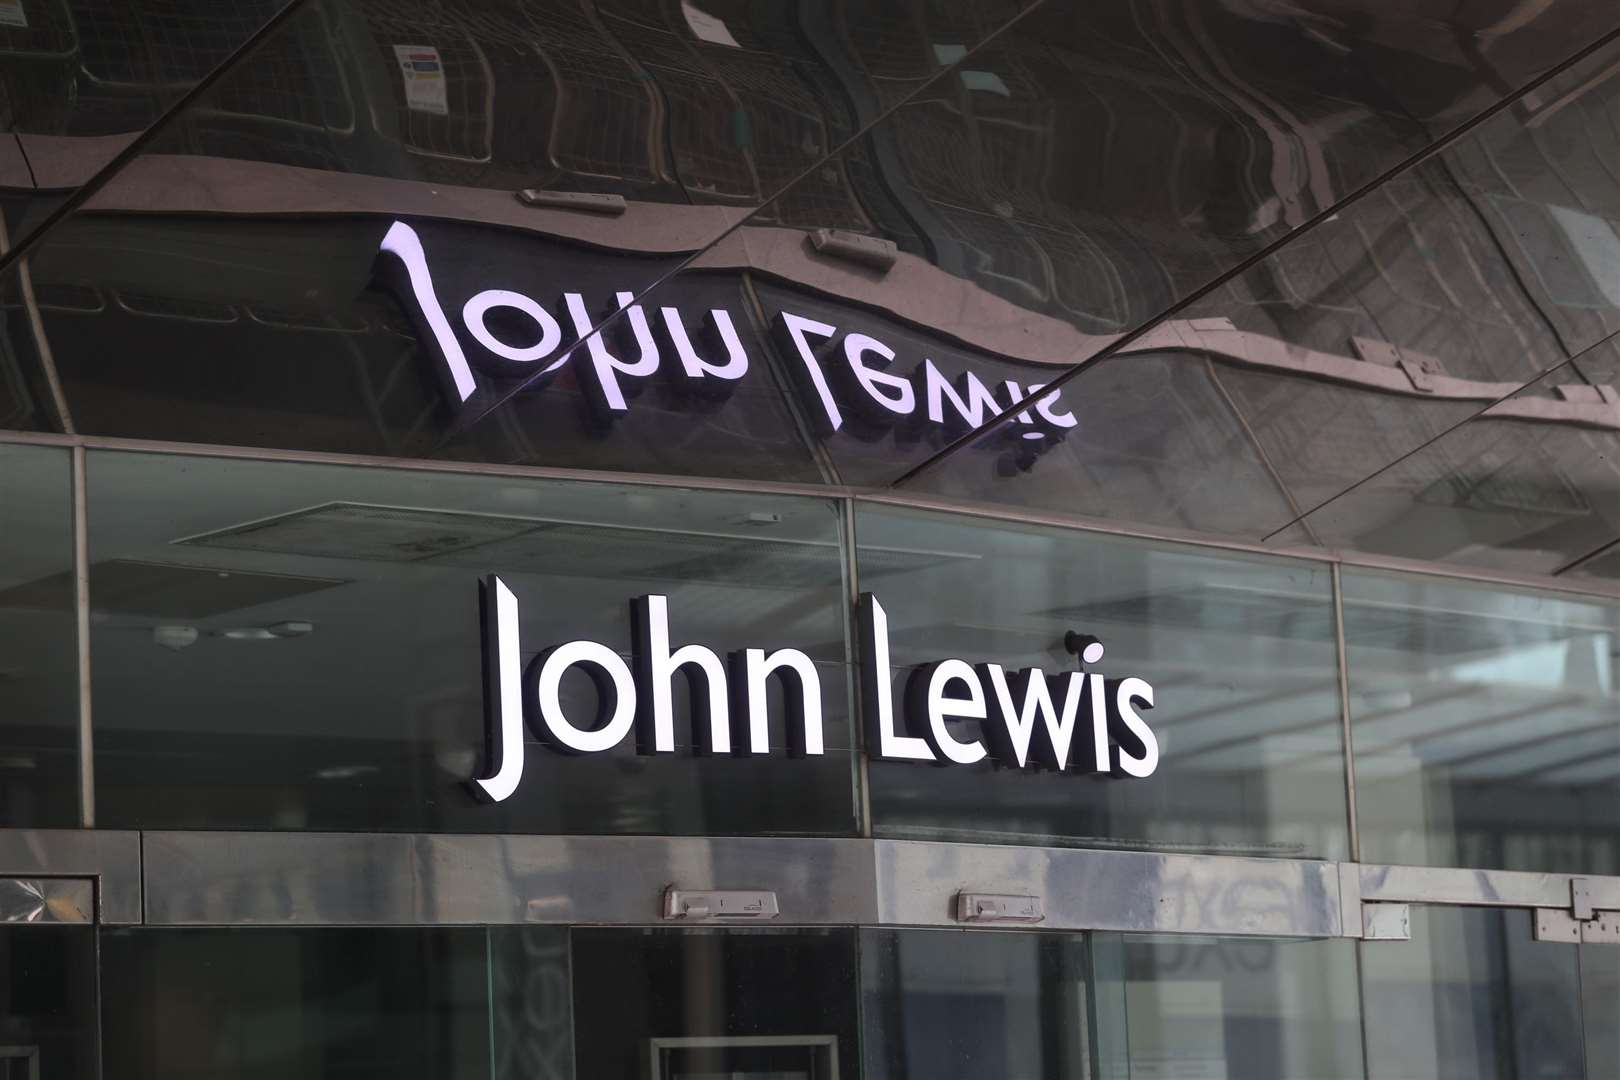 John Lewis will offer 200 lines of rental items next month